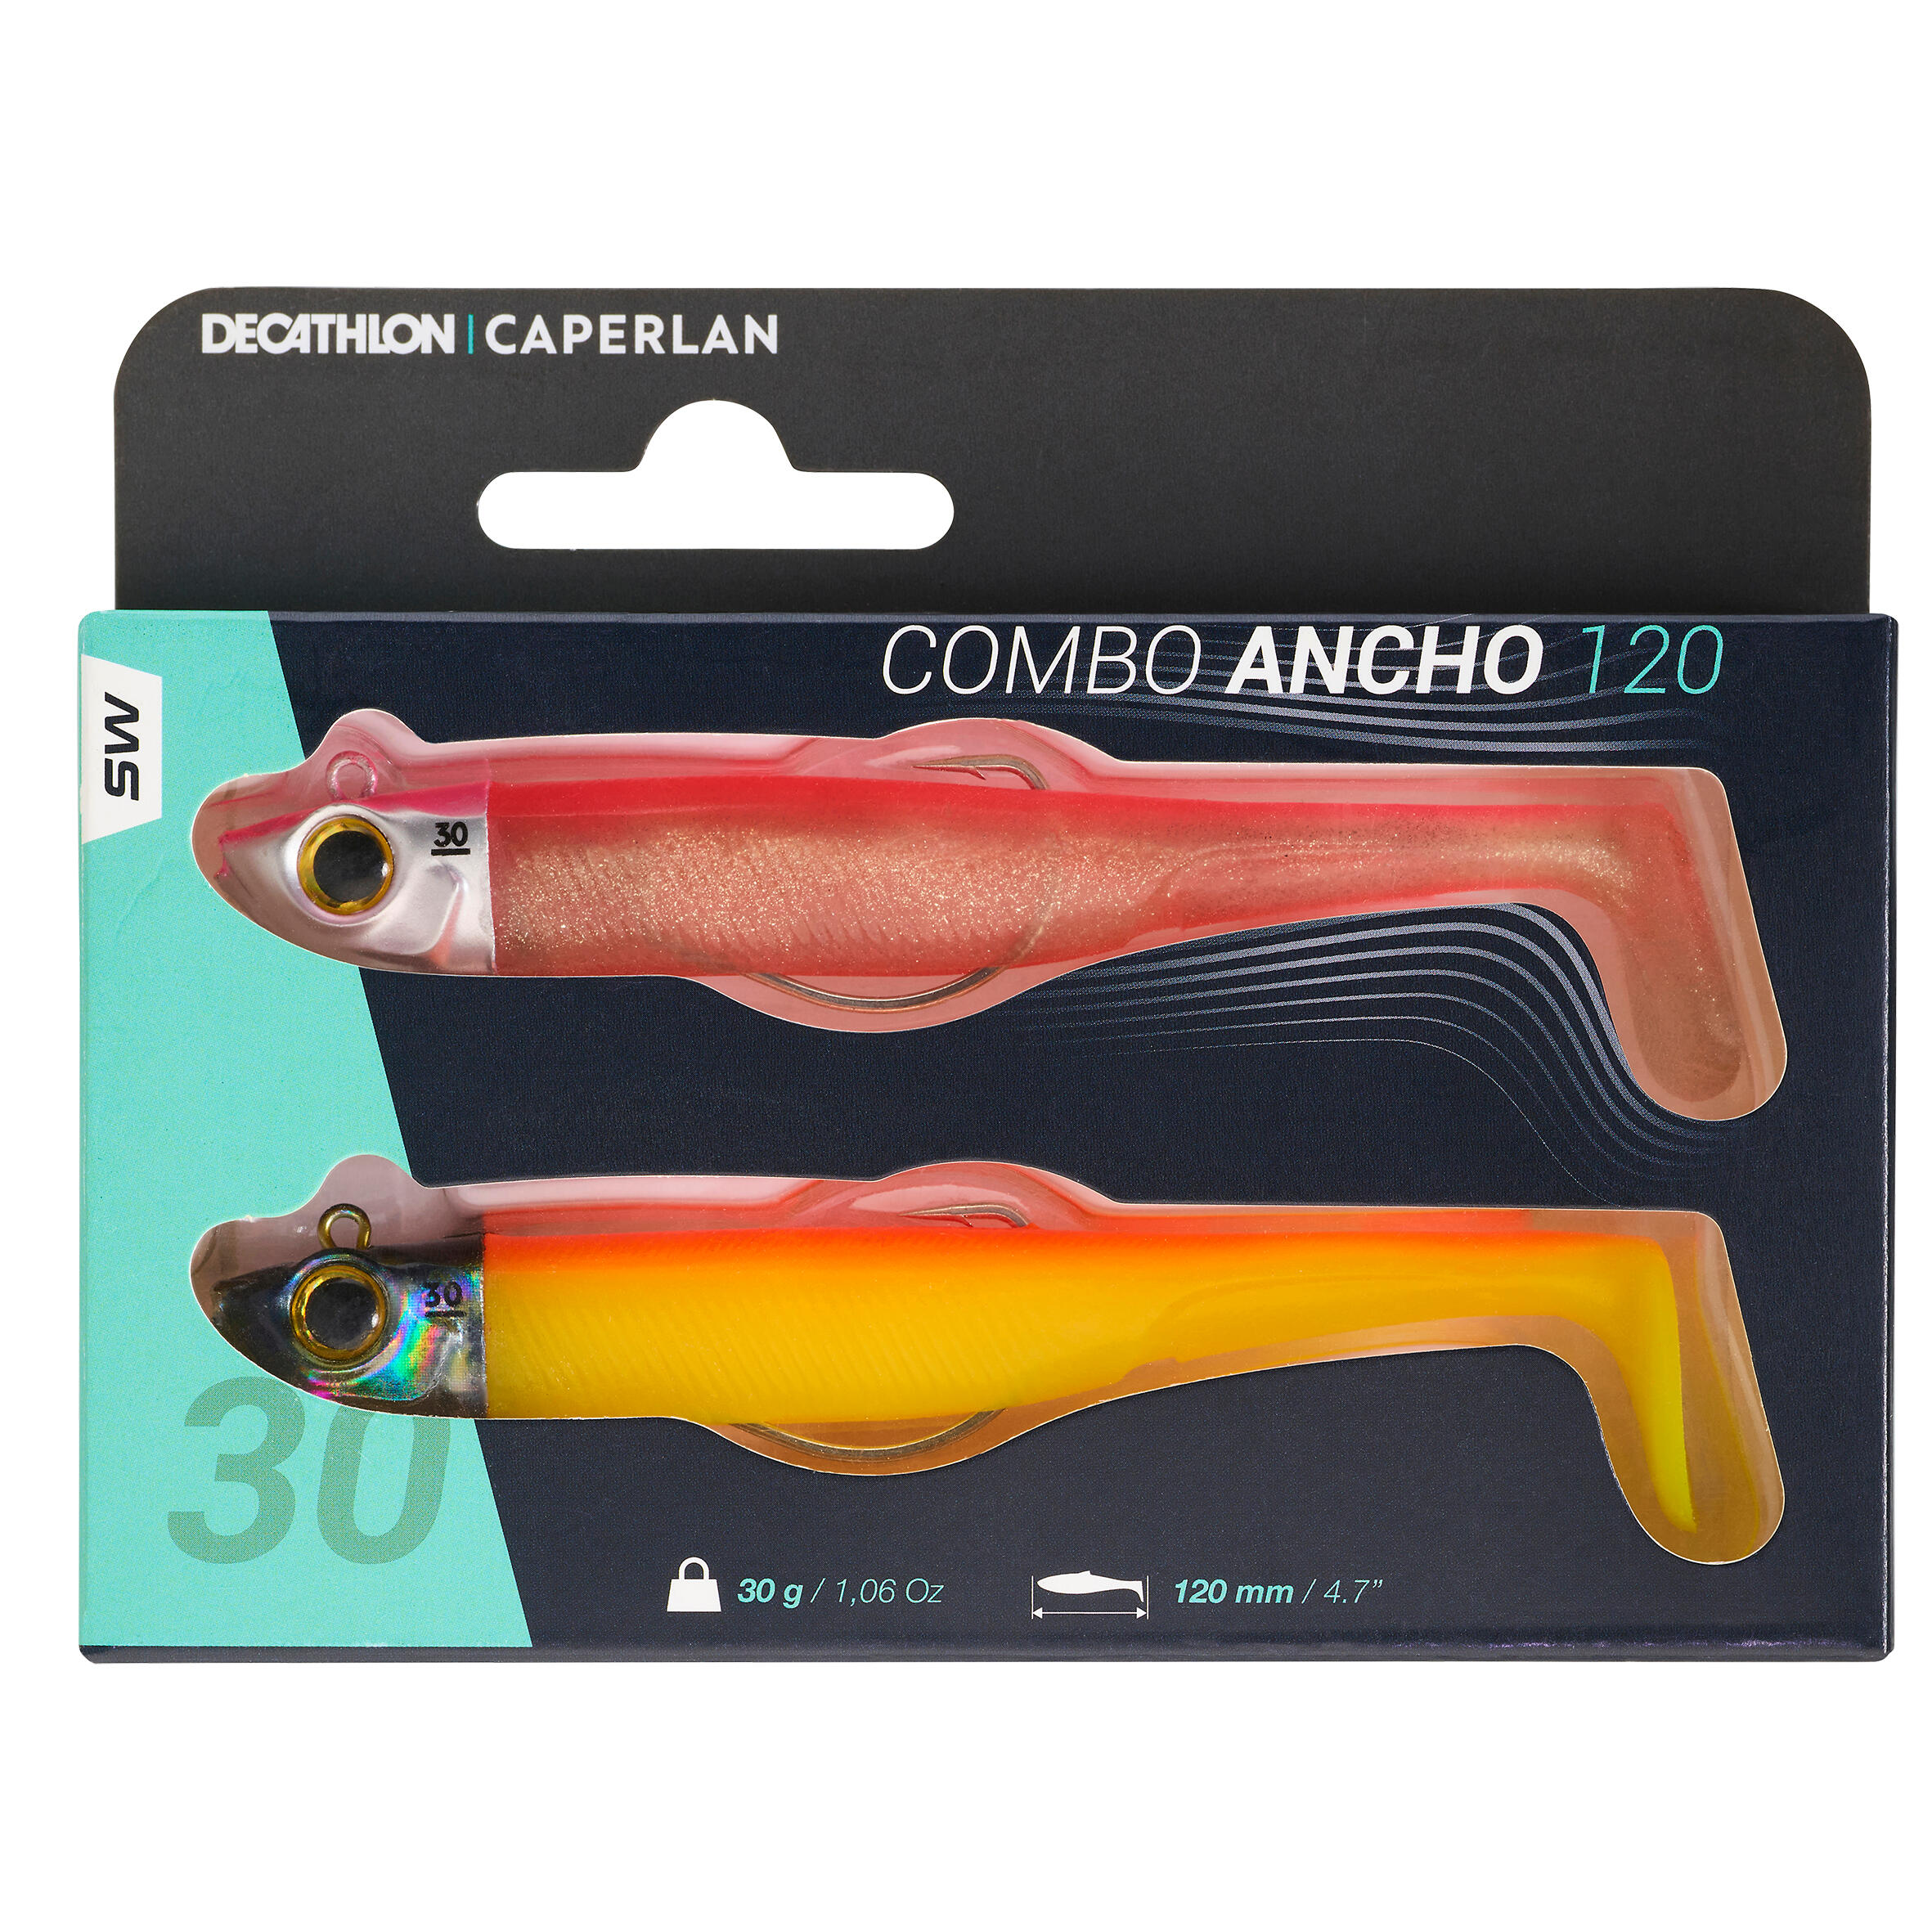 Sea fishing Texas anchovy shad soft lures COMBO ANCHO 120 30 g - Orange/Pink 11/12